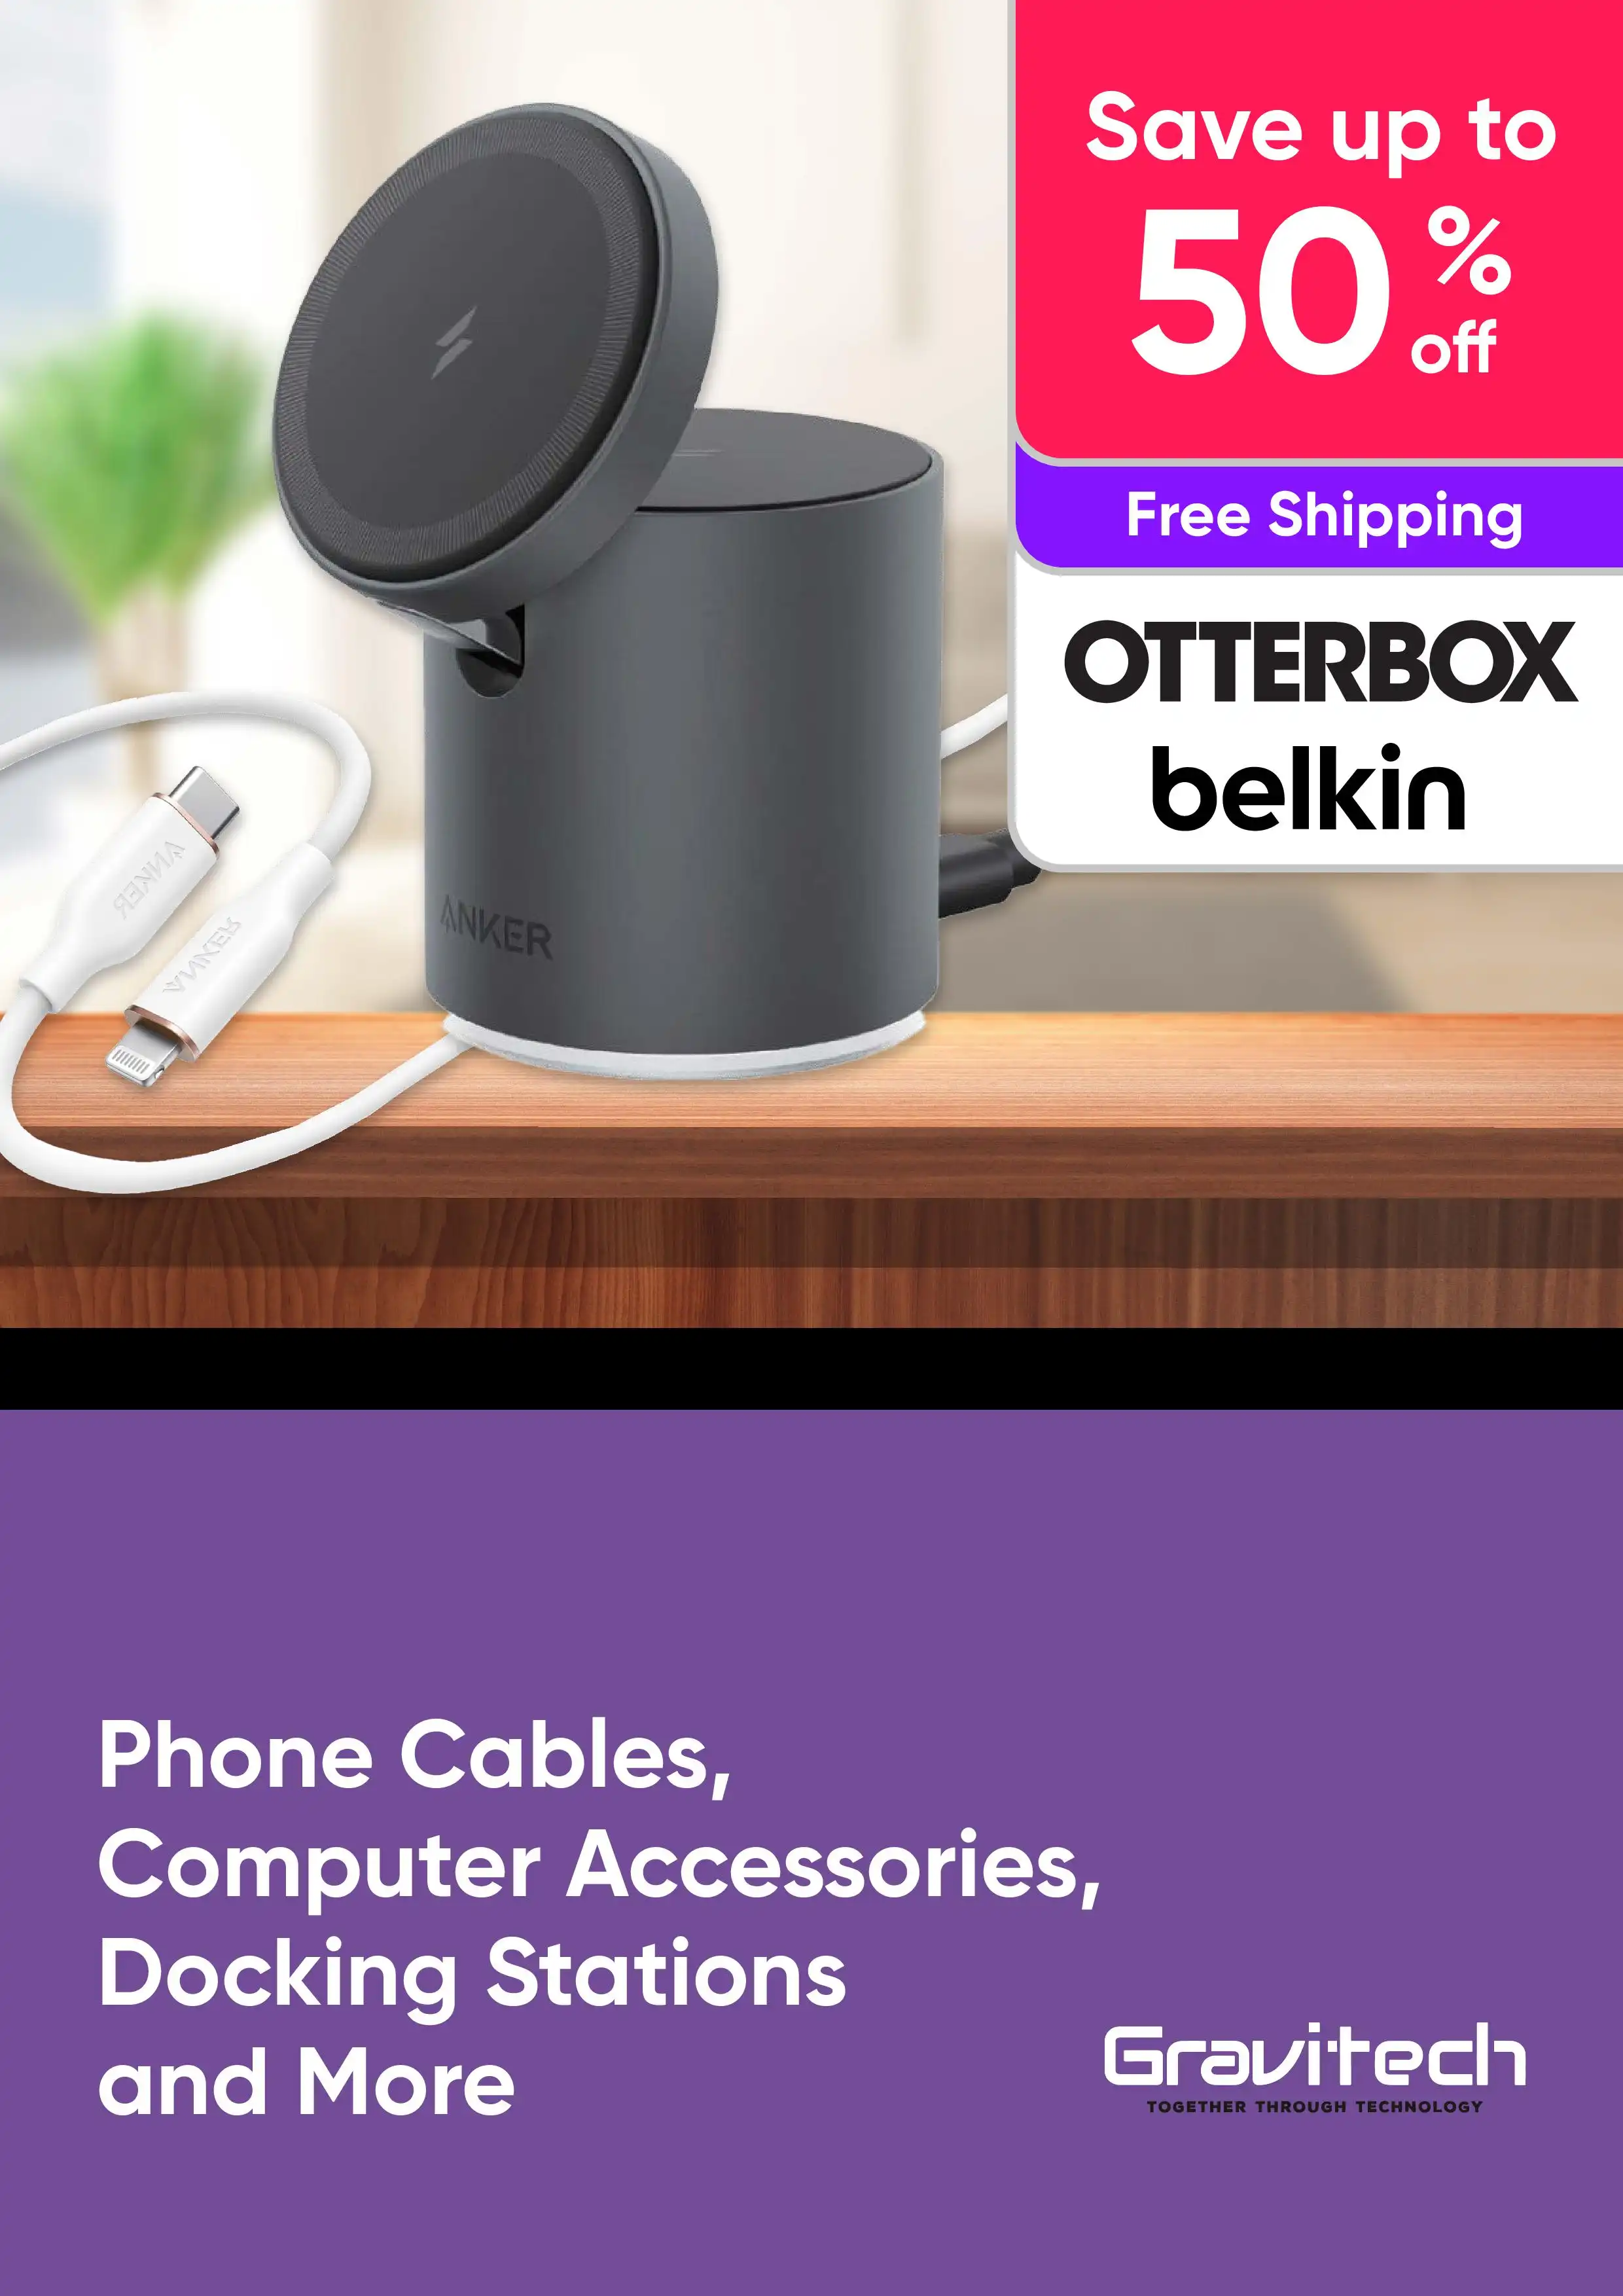 Phone Cables, Computer Accessories, Docking Stations and More Up to 50% Off RRP